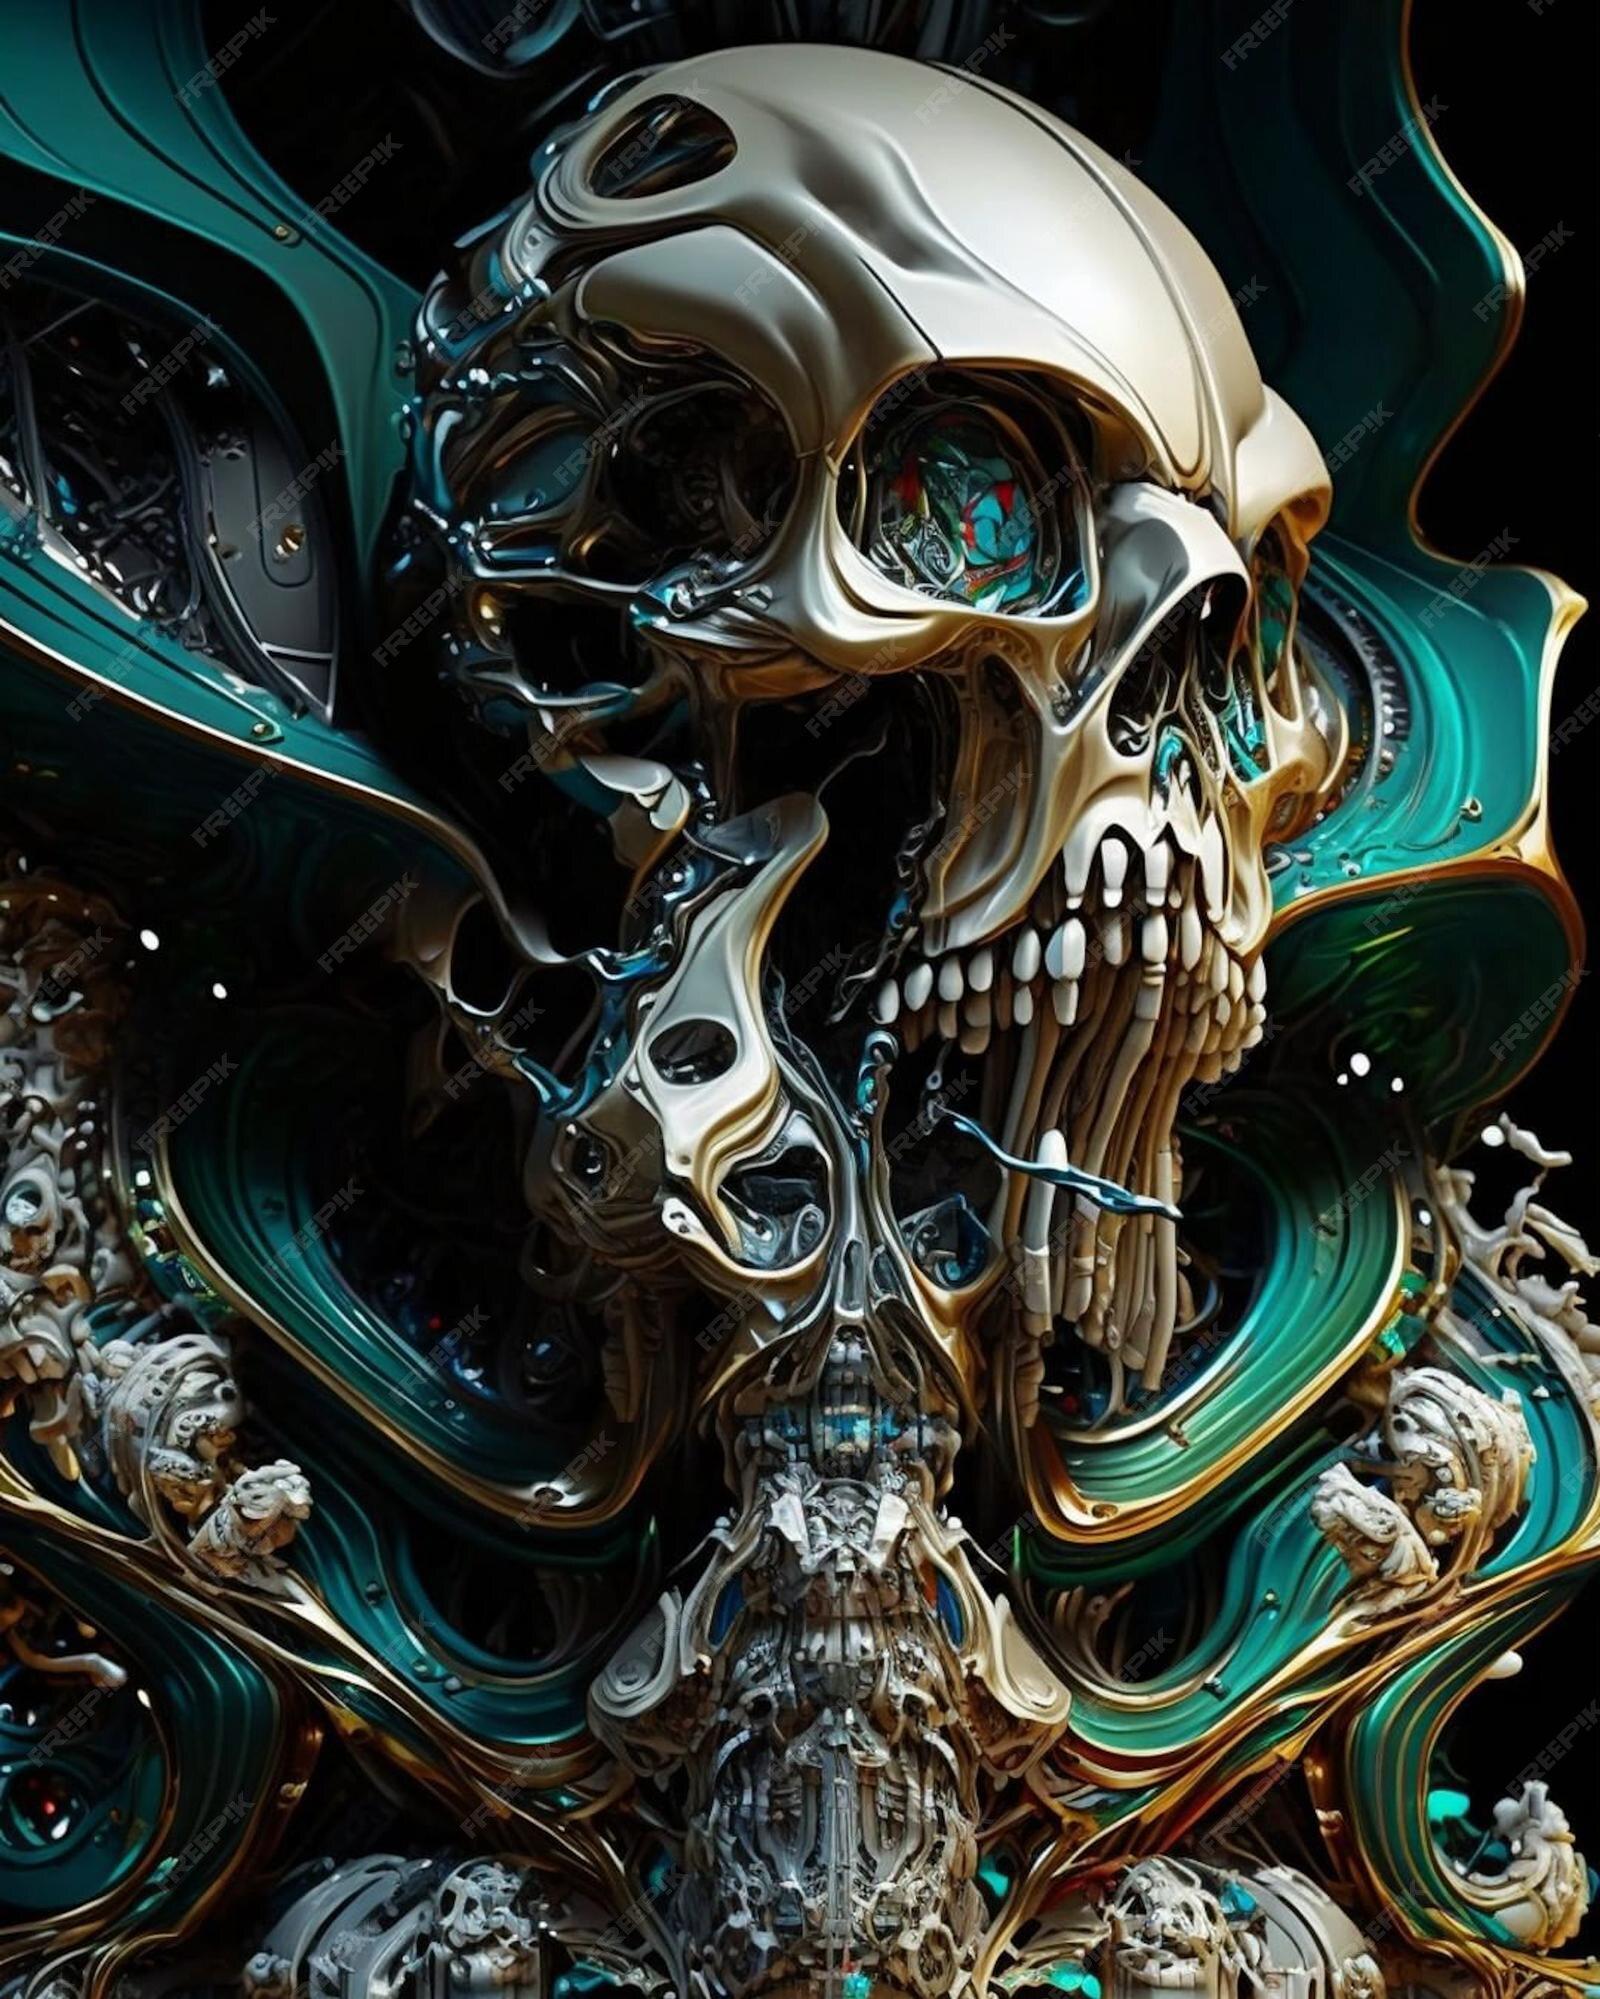 Premium Photo An Image Of A Skull And Monster In The